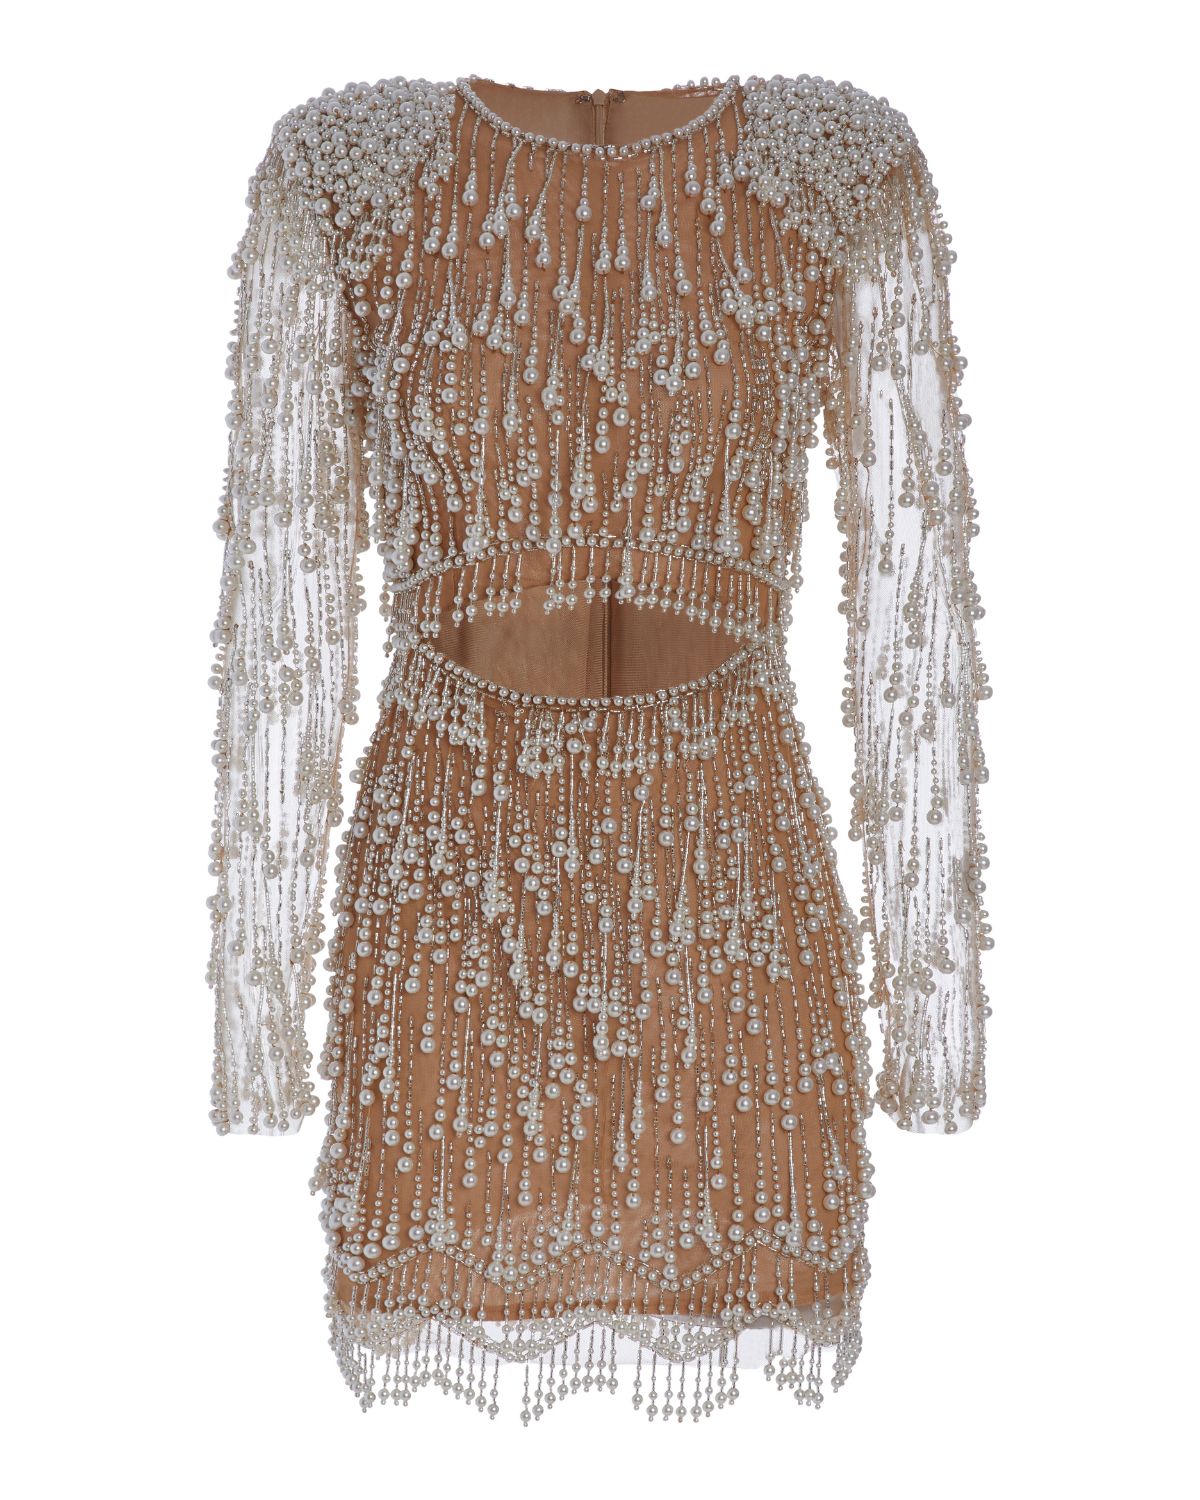 Fully Beaded Cut-Out Cocktail Dress (FINAL SALE)